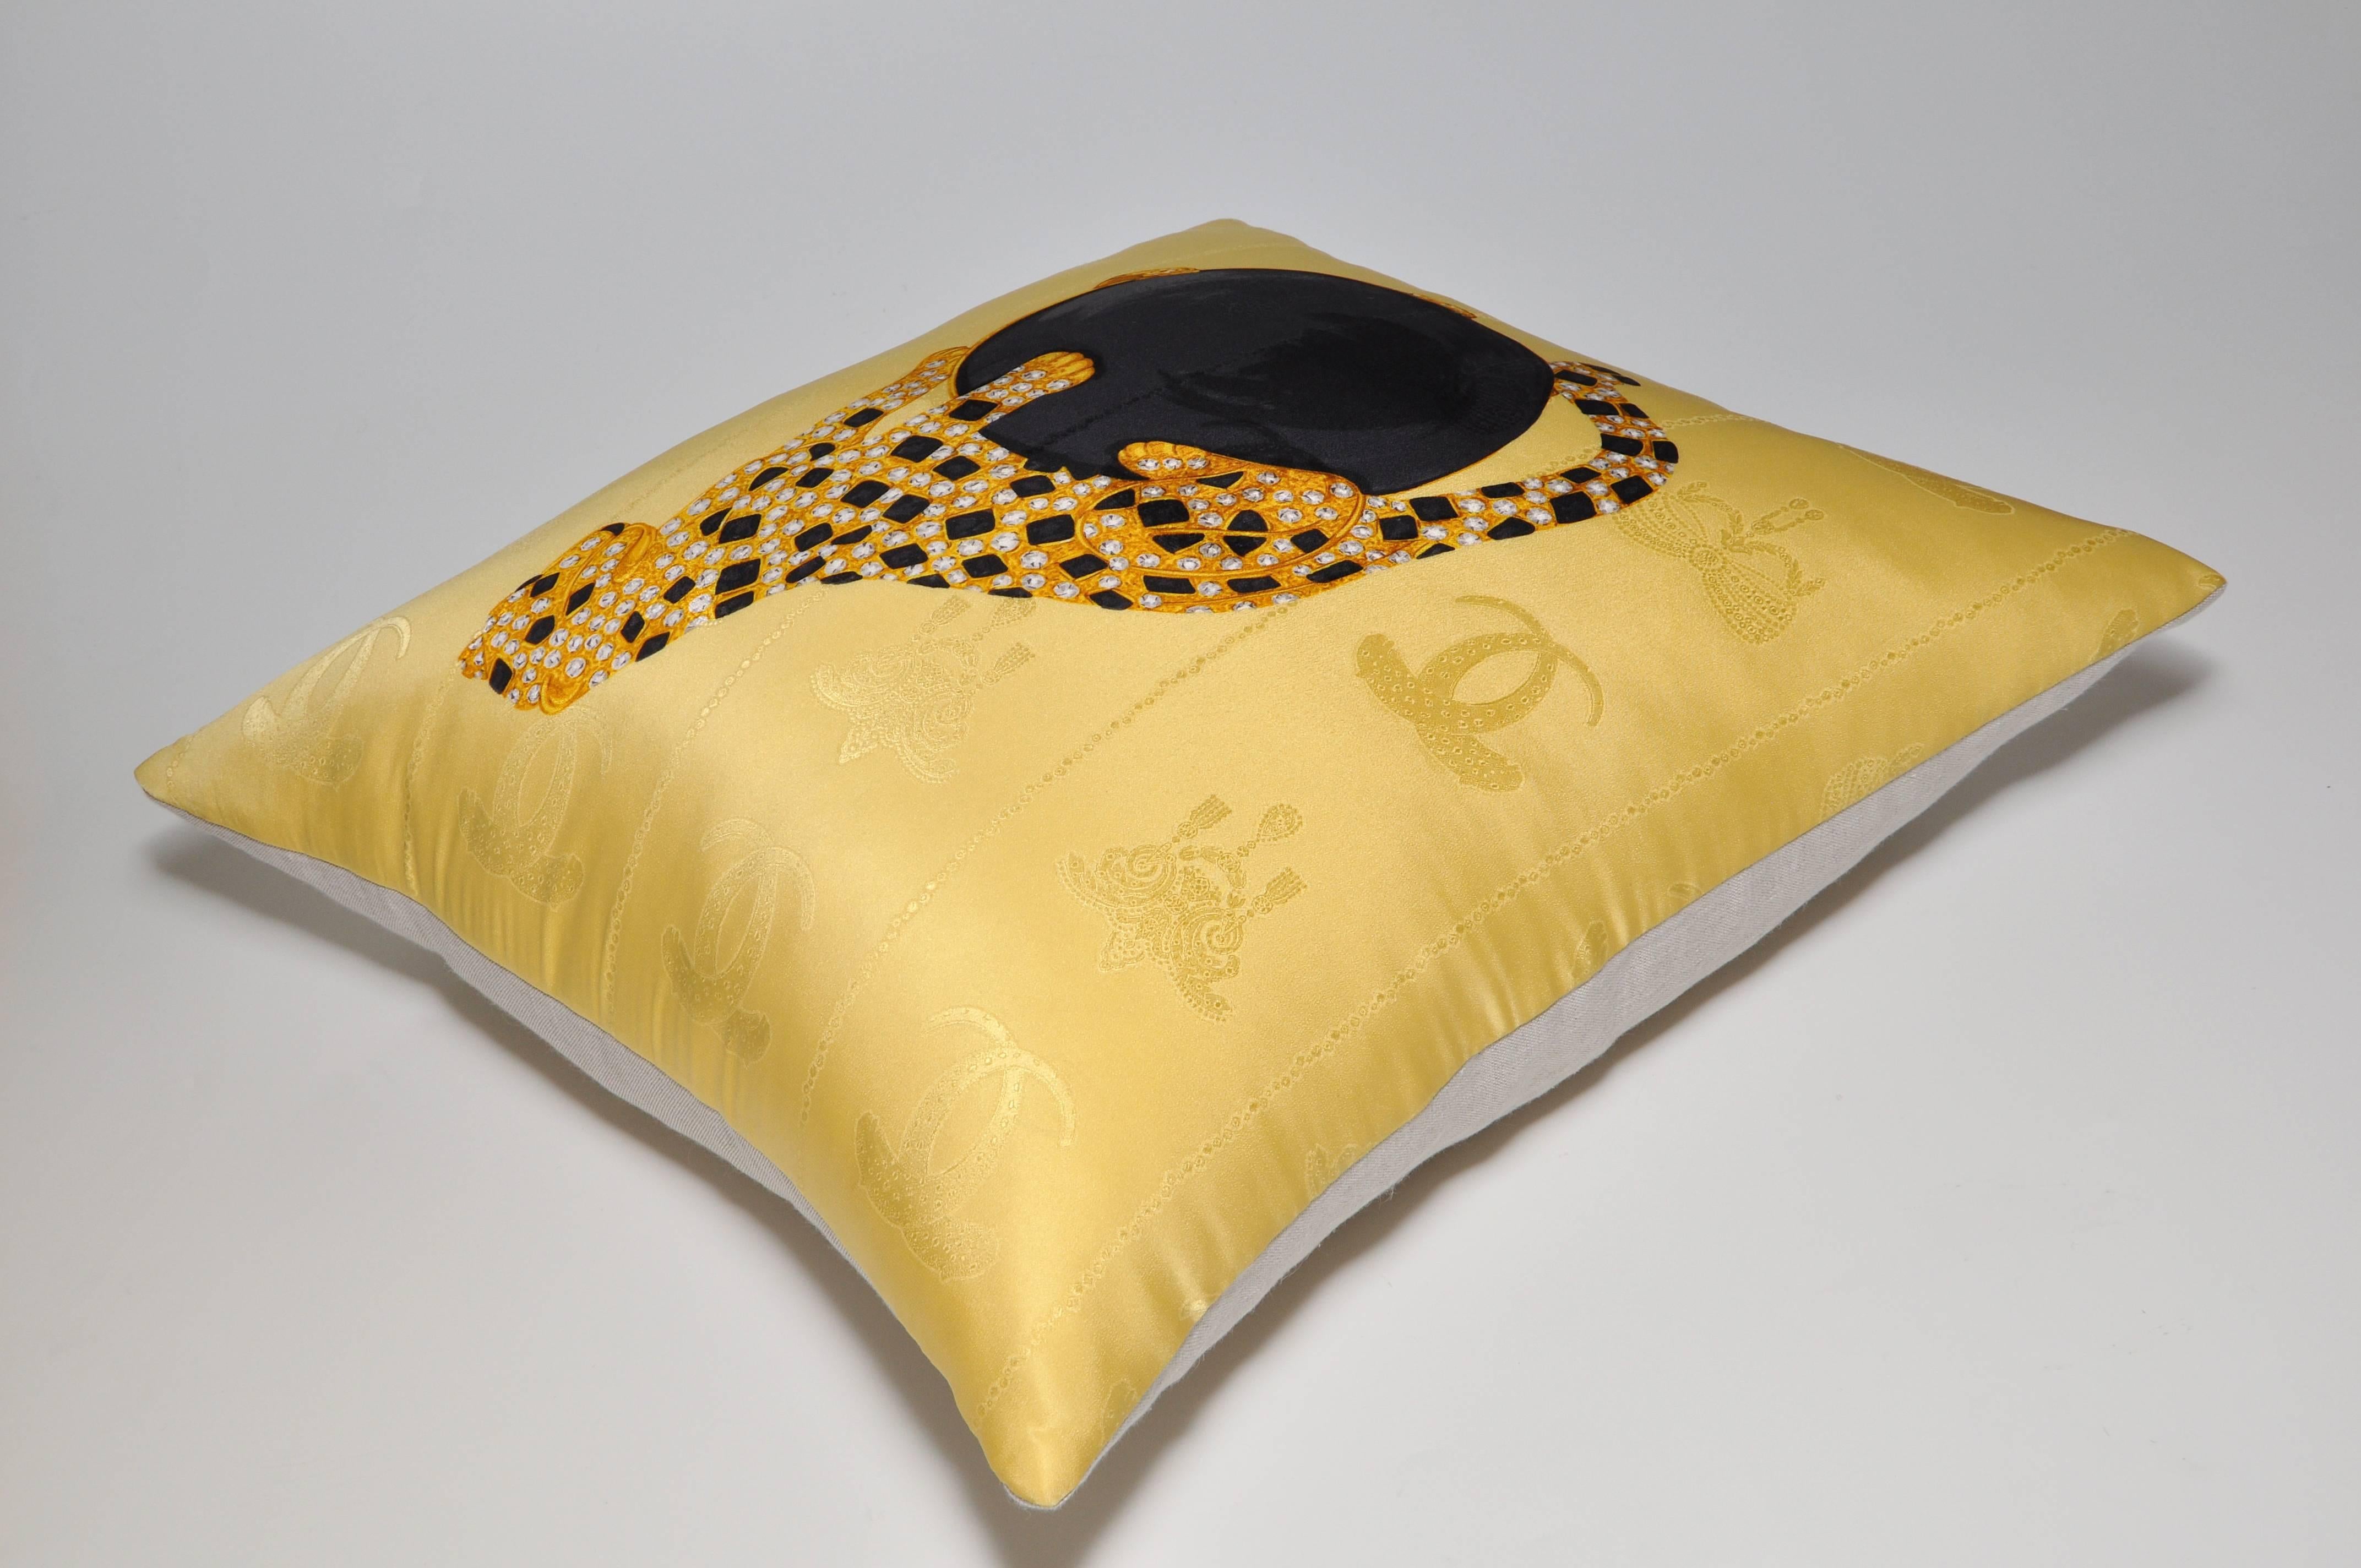 French Gold Vintage Cartier Panther Diamond Jewelry Silk Scarf Cushion Pillow For Sale